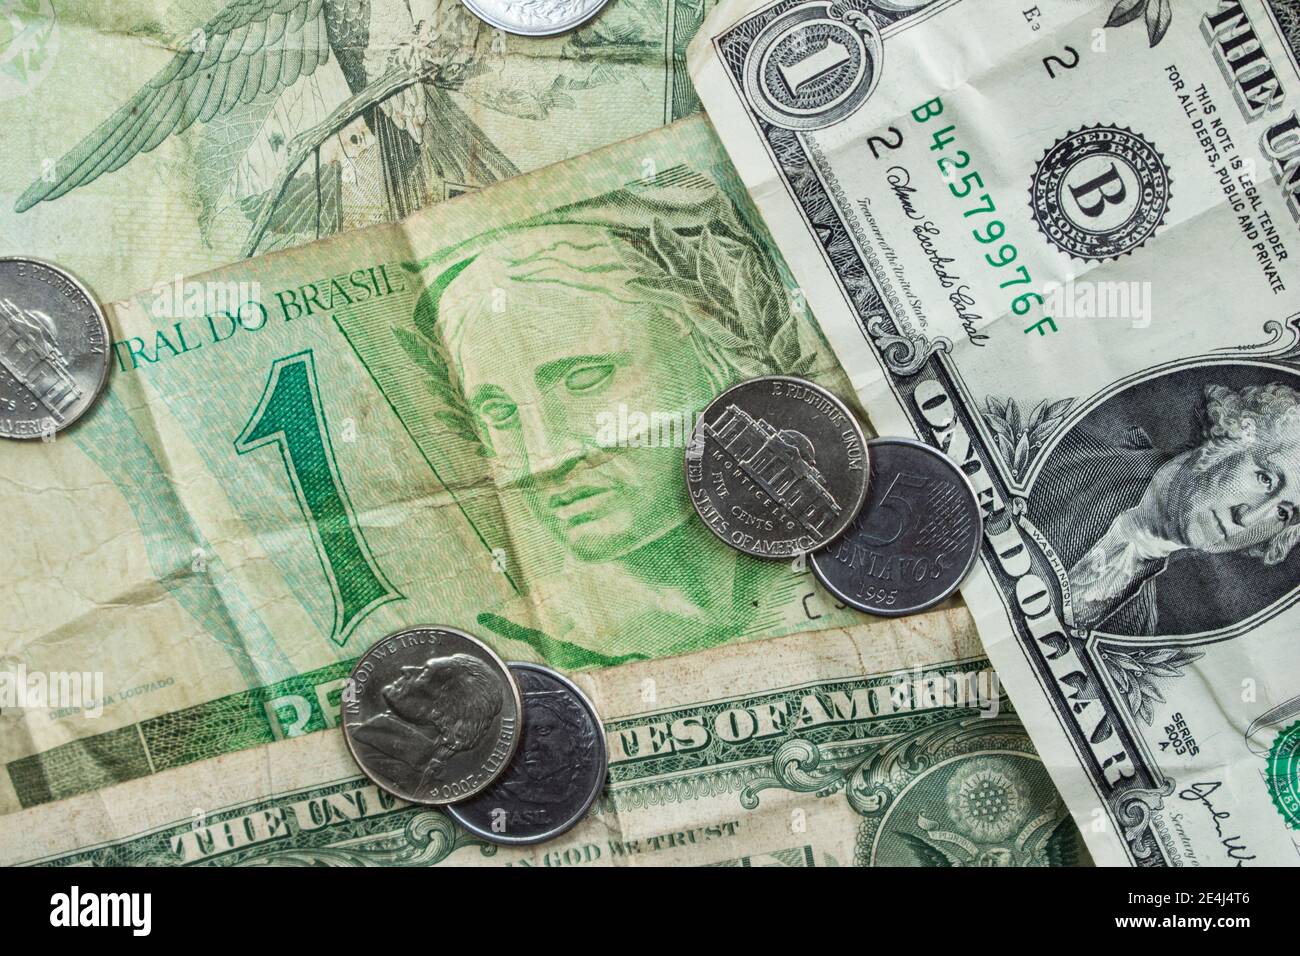 Brazilian currency and U.S. dollar bills stacked together. Stock Photo